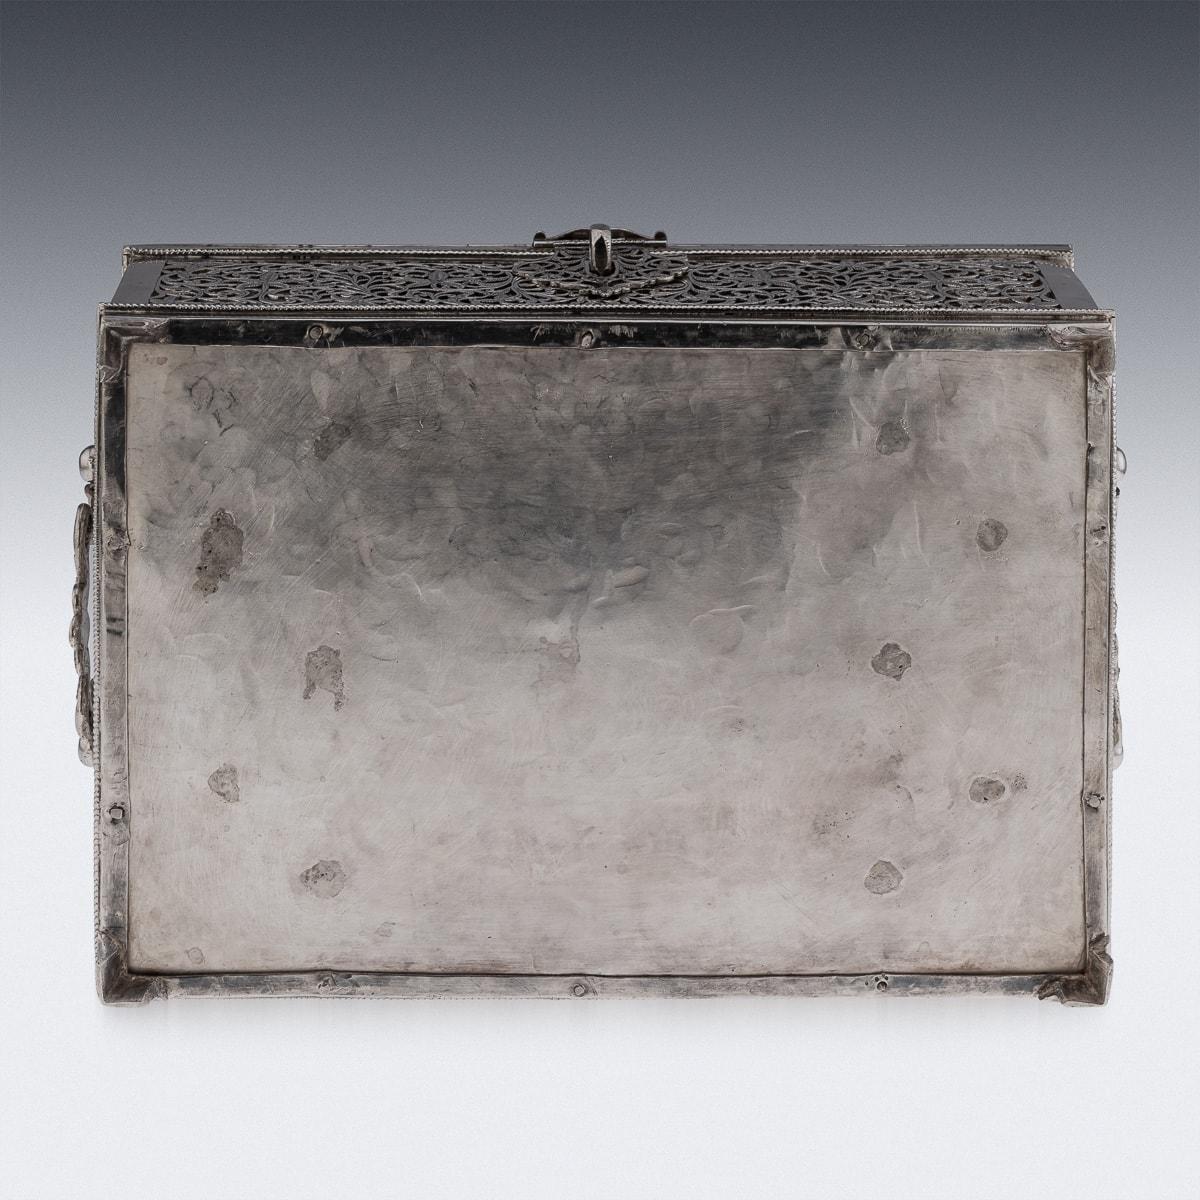 Antique 20th Century Indian Kutch Solid Silver Treasure Chest / Casket c.1900 3